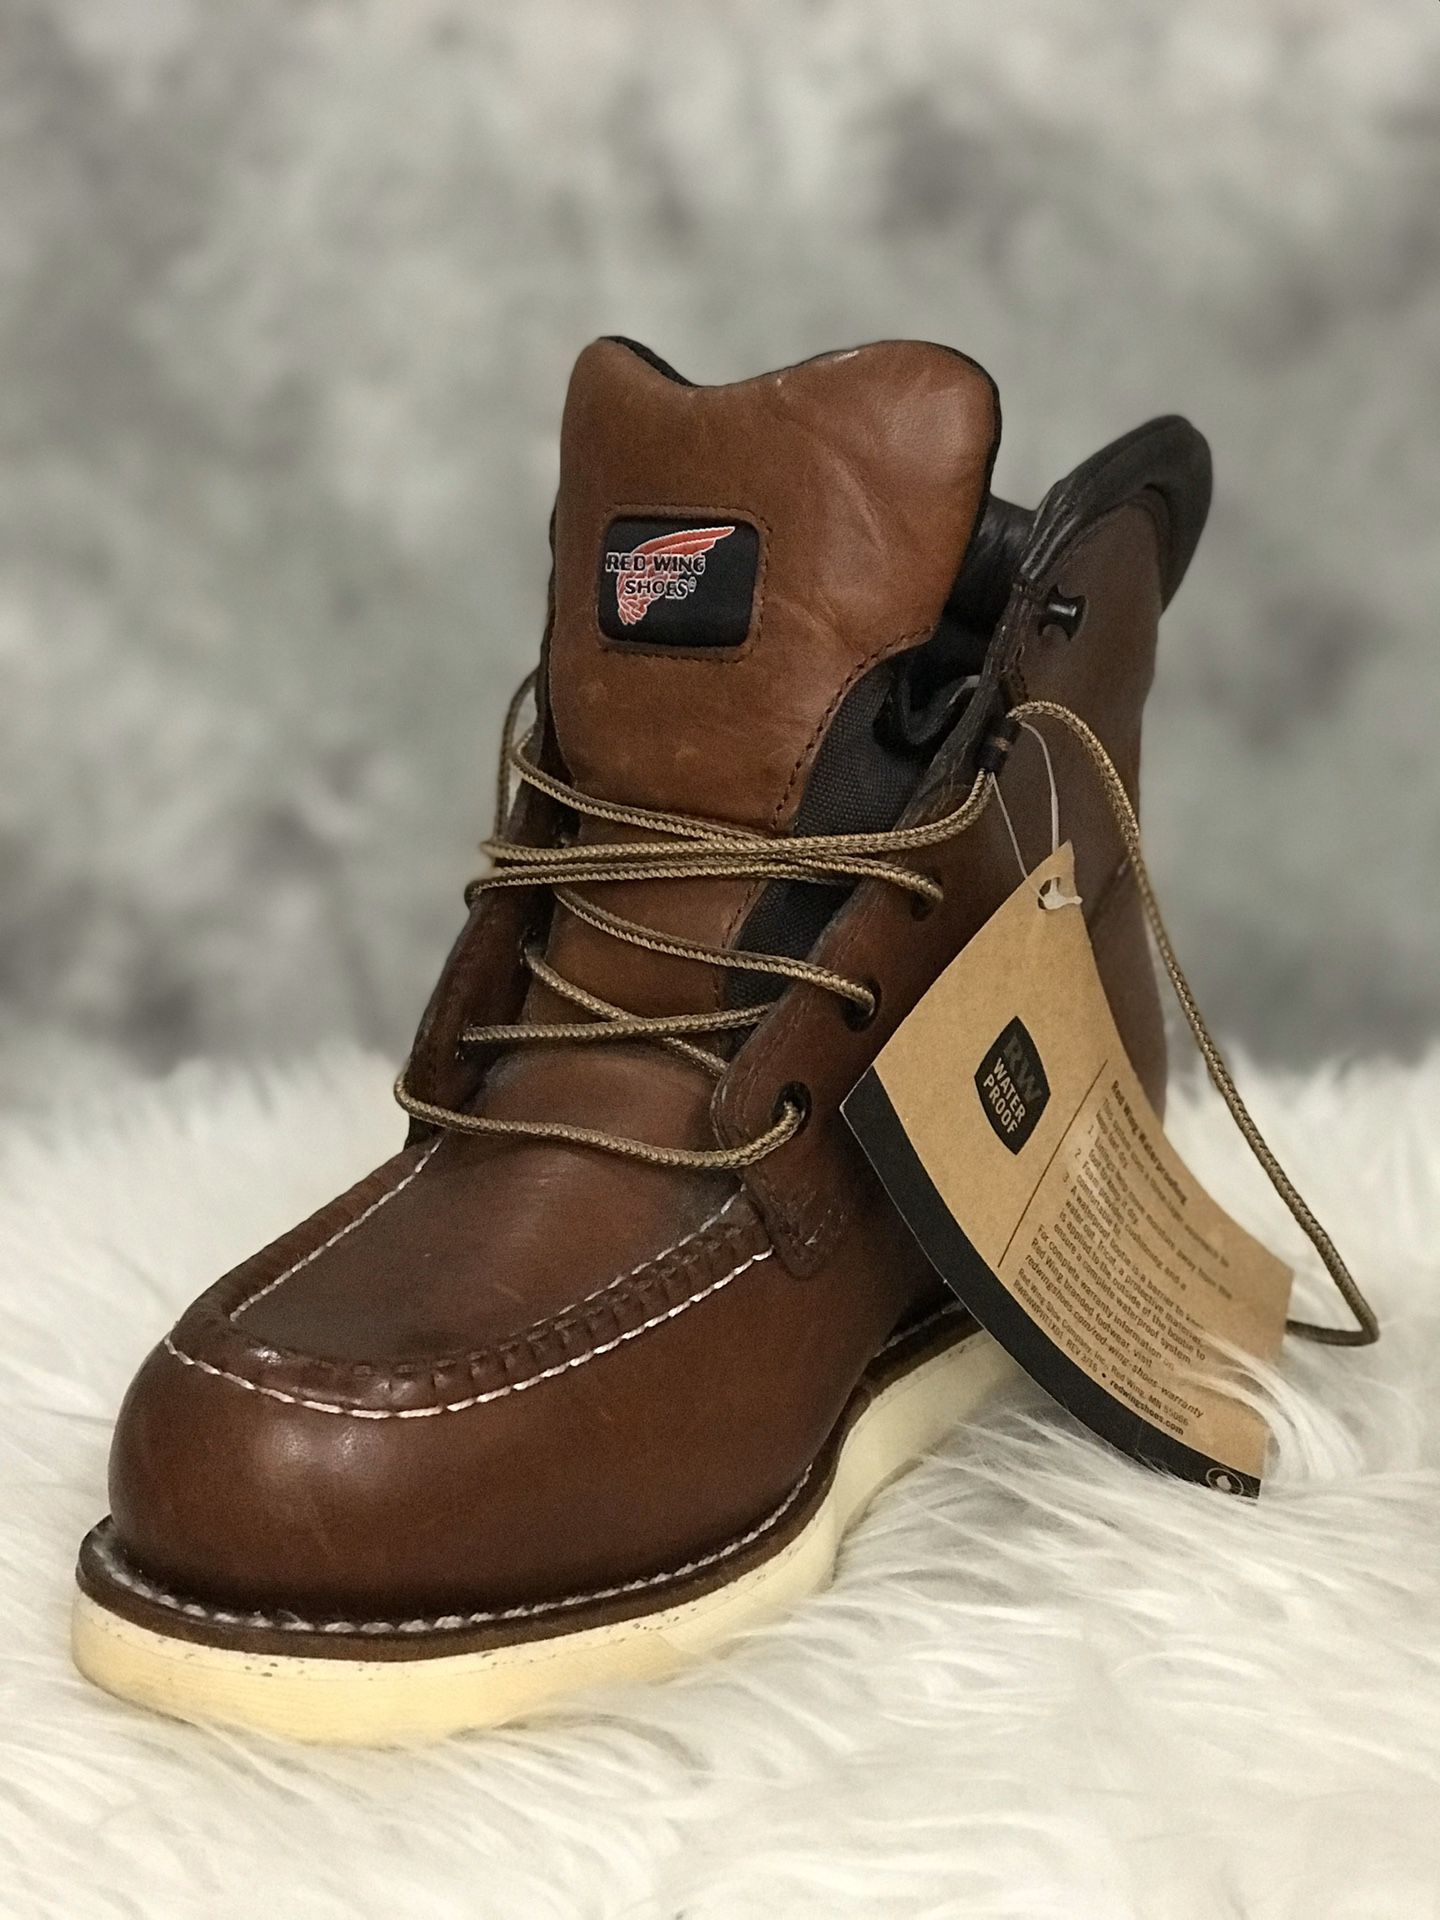 Red Wing Shoes, Boots, Botas, Working Boots